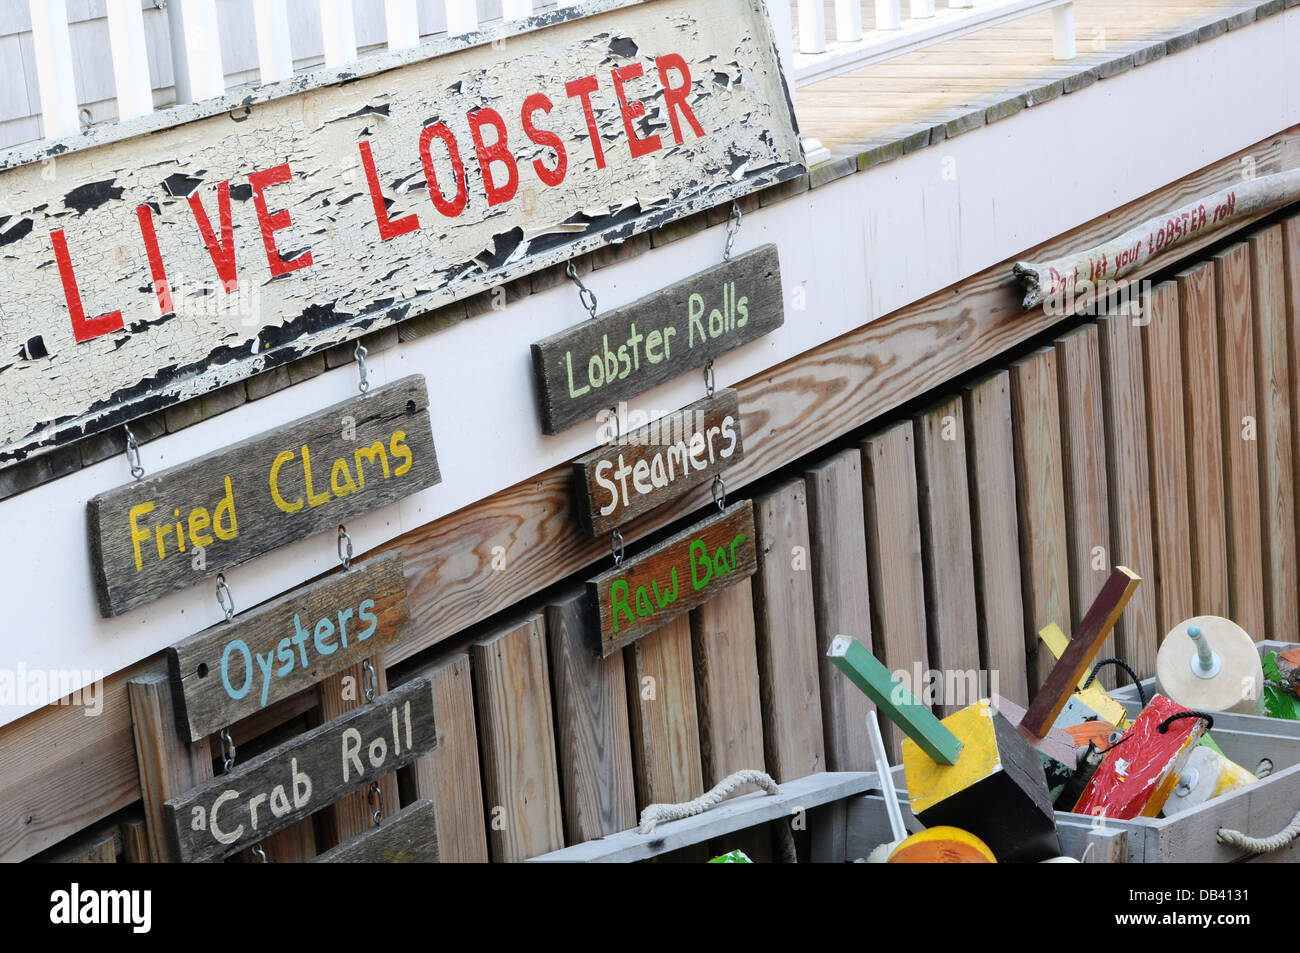 Live lobster and assorted other seafood signs Stock Photo